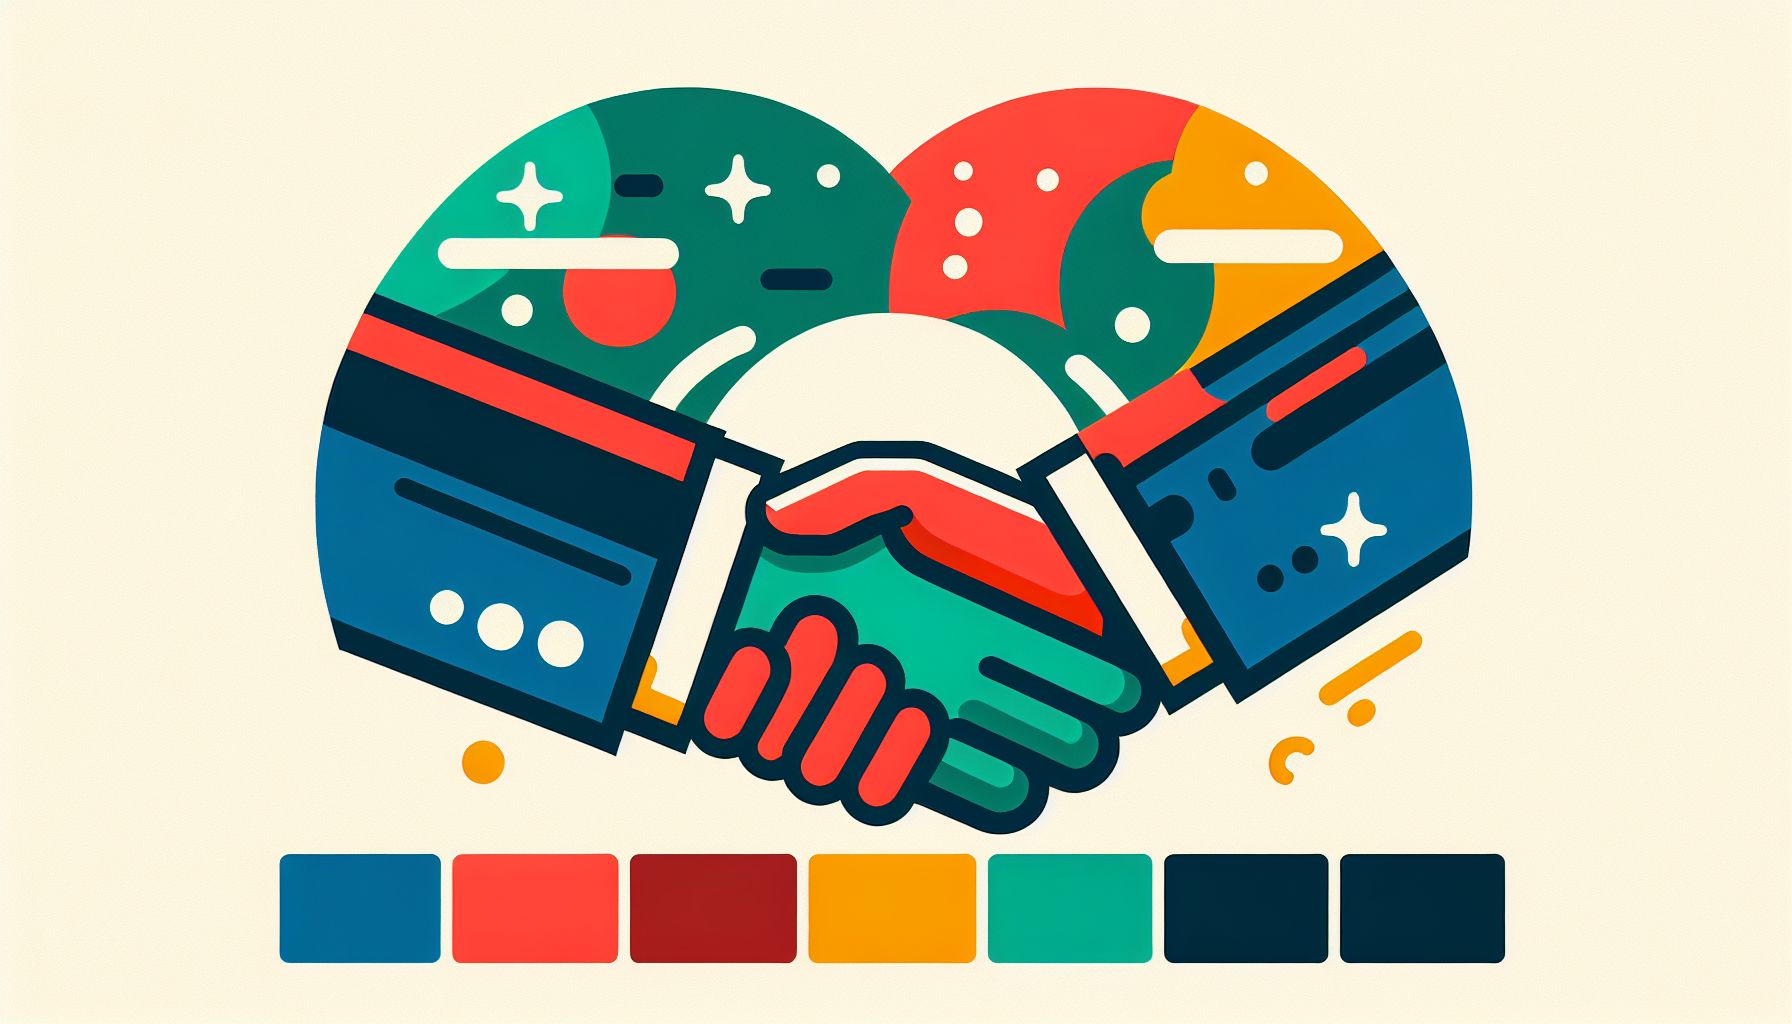 Handshake in flat illustration style and white background, red #f47574, green #88c7a8, yellow #fcc44b, and blue #645bc8 colors.